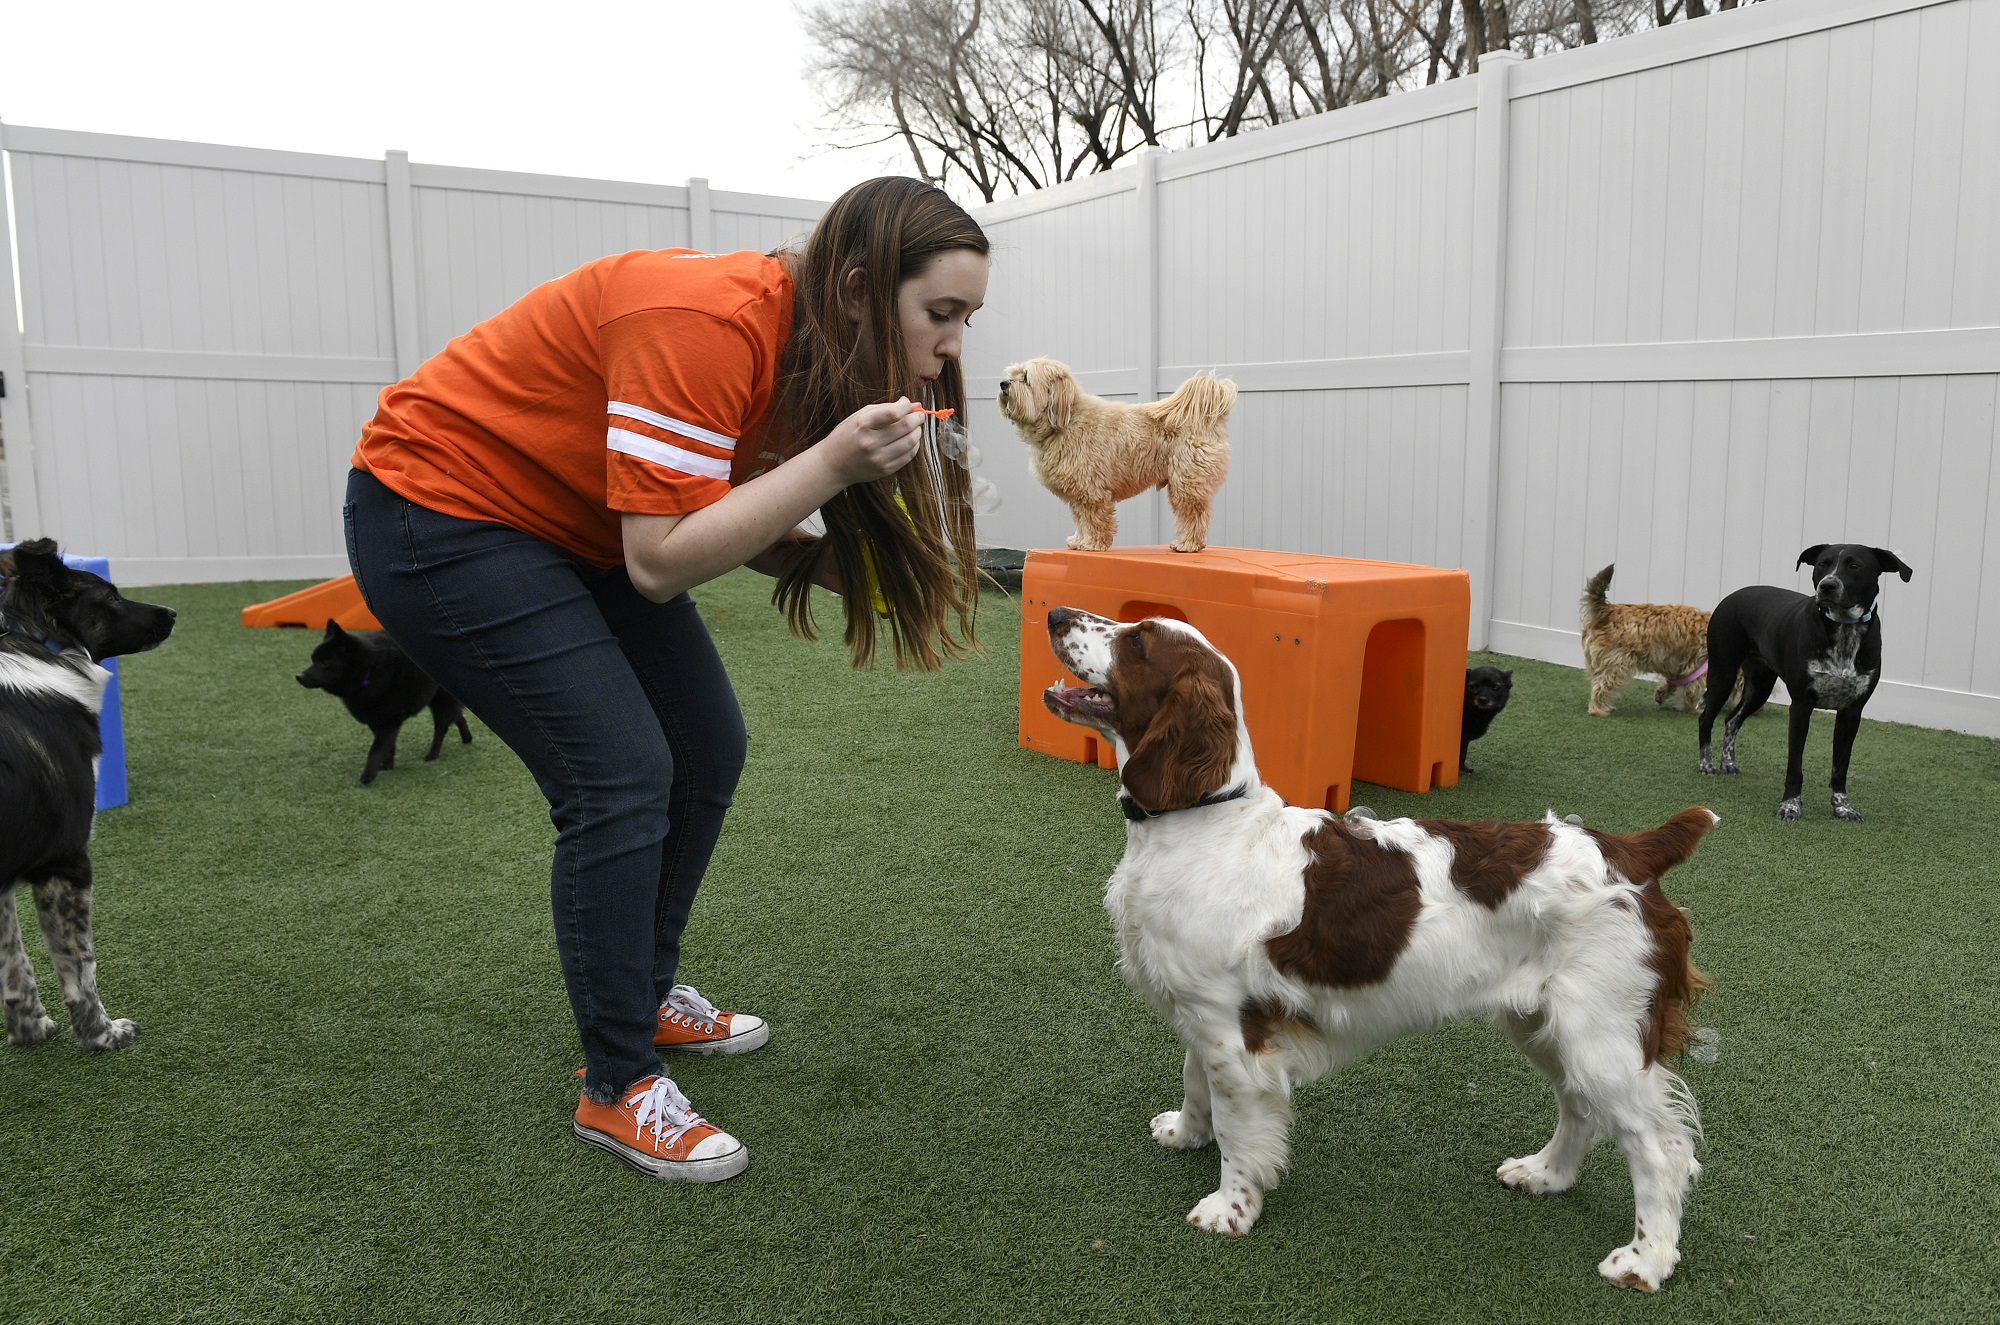 Dogtopia franchise owner Ashley Todd blows bacon flavored edible bubbles for dogs in the outside play area at Dogtopia in Fort Collins, Colorado.